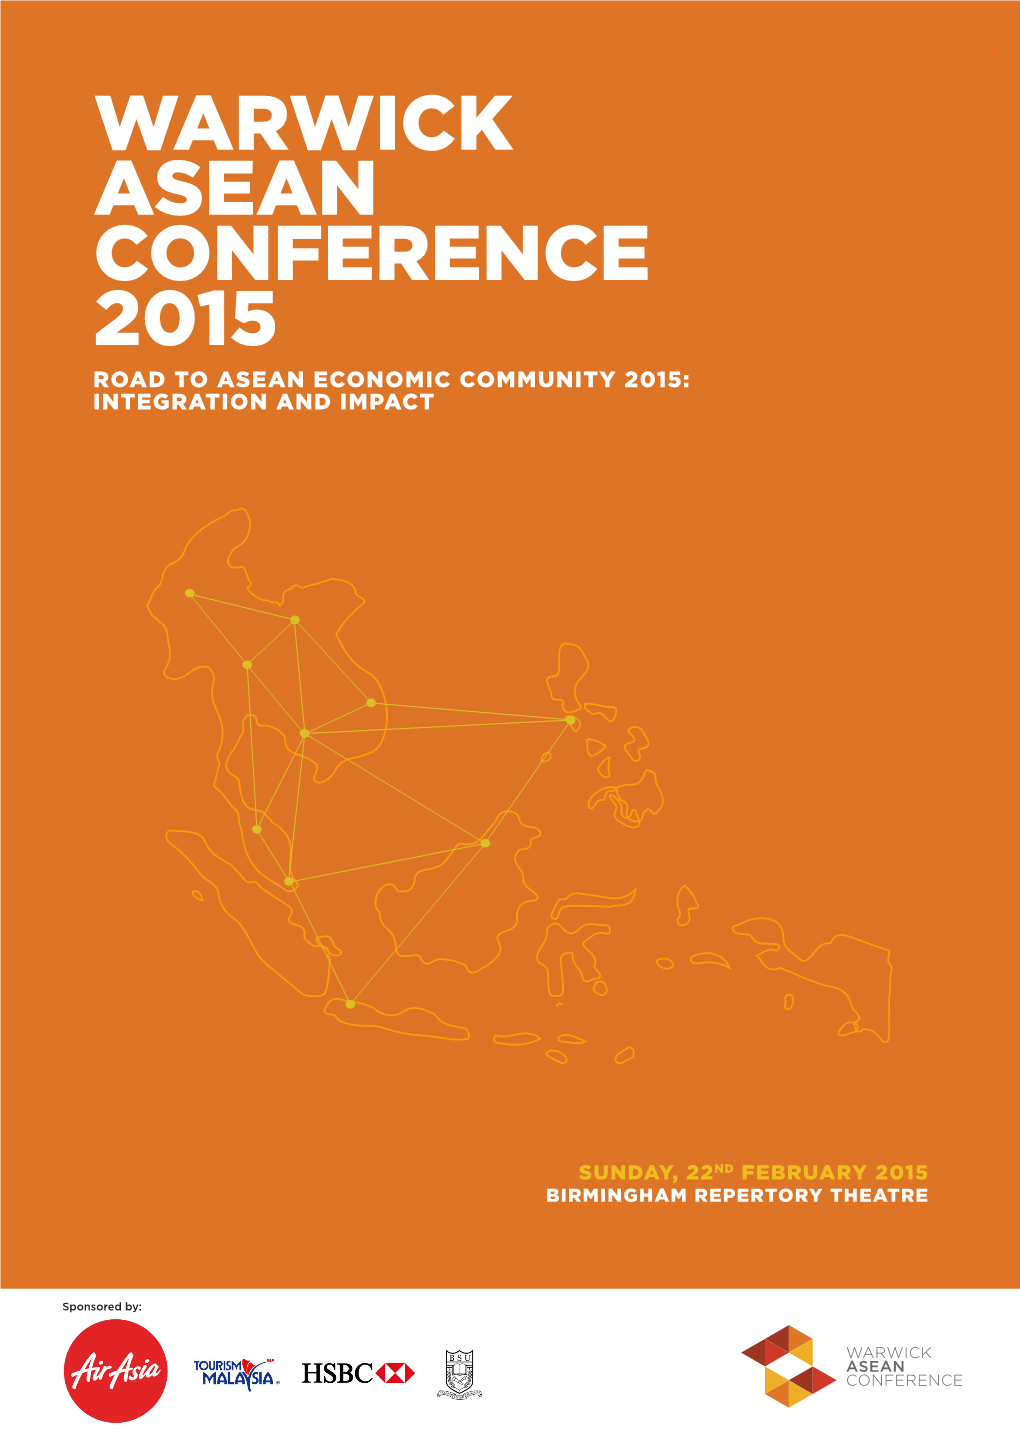 Warwick Asean Conference 2015 Road to Asean Economic Community 2015: Integration and Impact